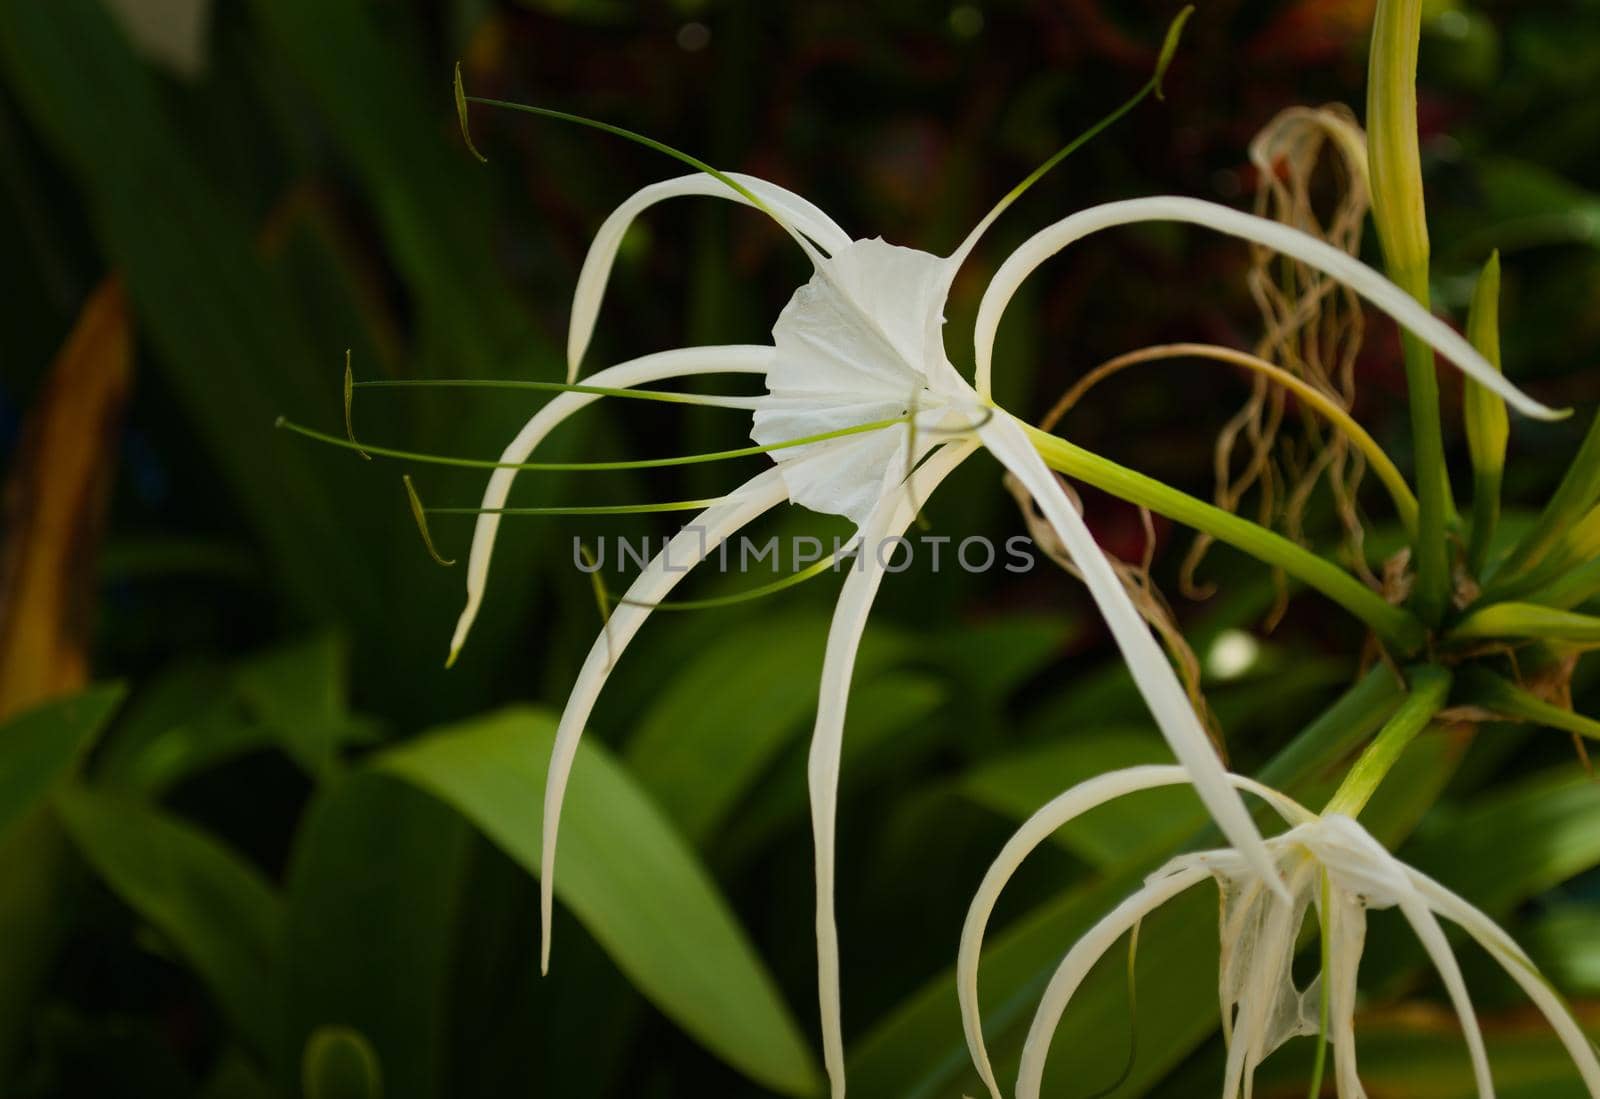 Caribbean spider lily (Hymenocallis caribaea), close up of a specimen in a garden in Thailand.